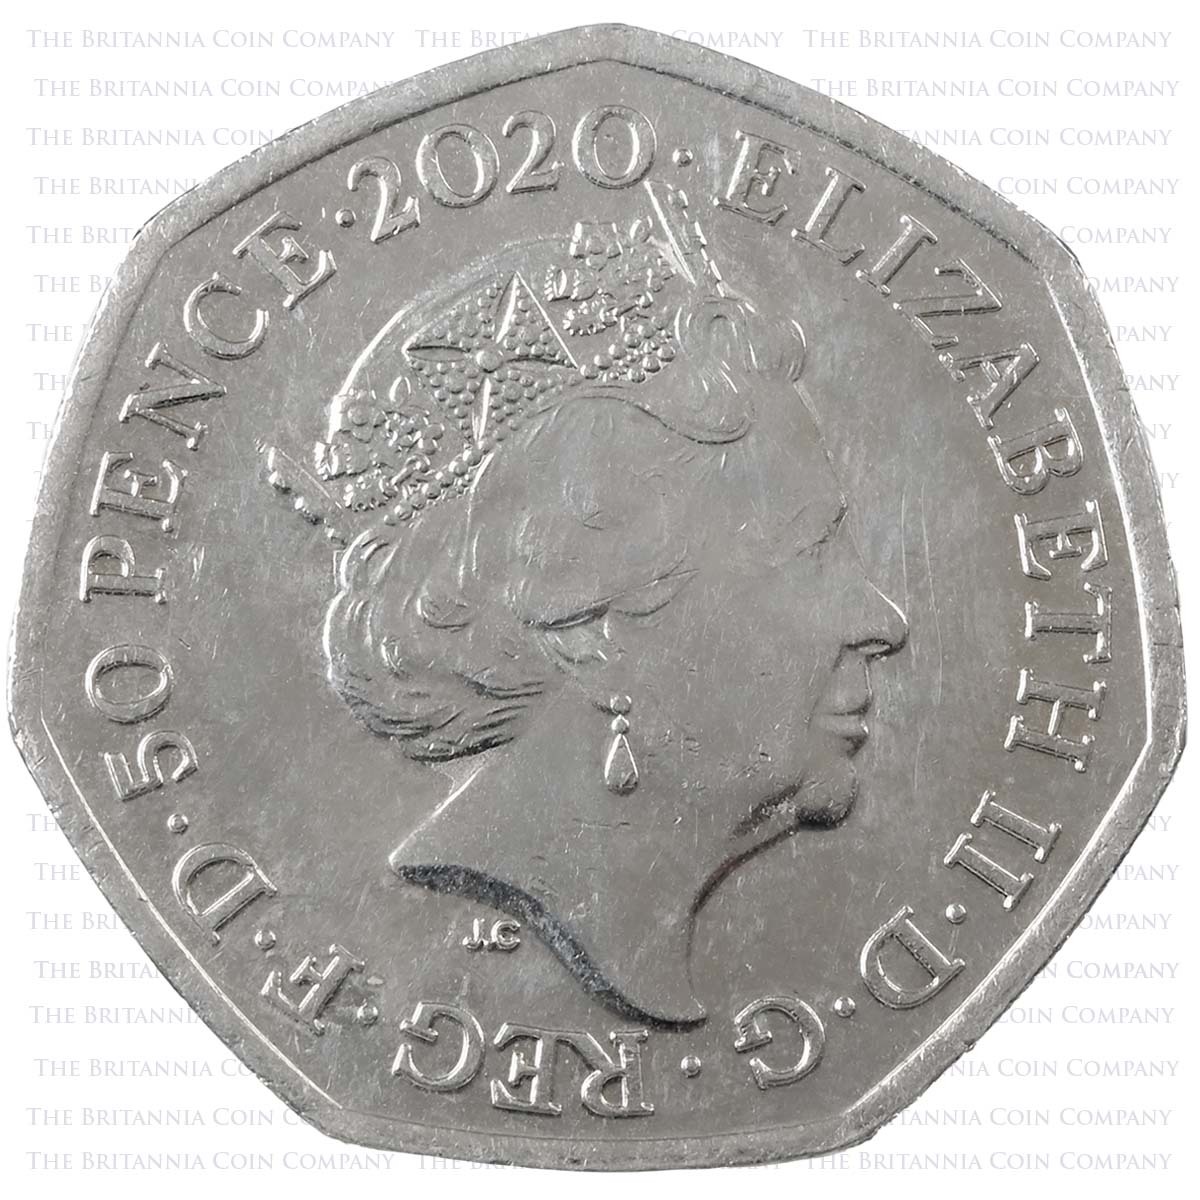 2020 Diversity Built Britain Circulated Fifty Pence Coin Obverse